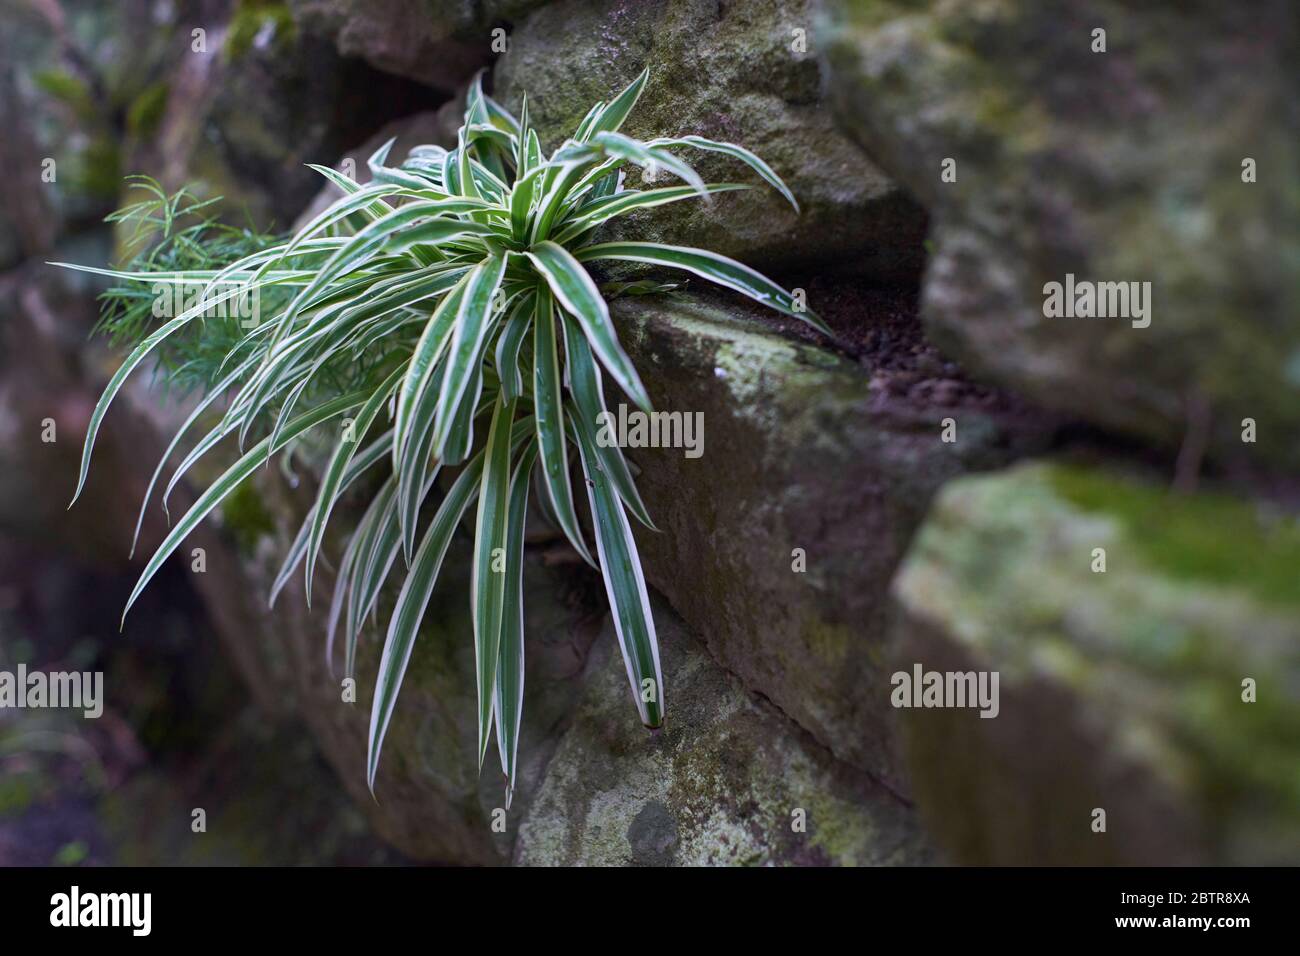 Dracaena plant growing wild outdoors in a garden at a stone wall Stock Photo